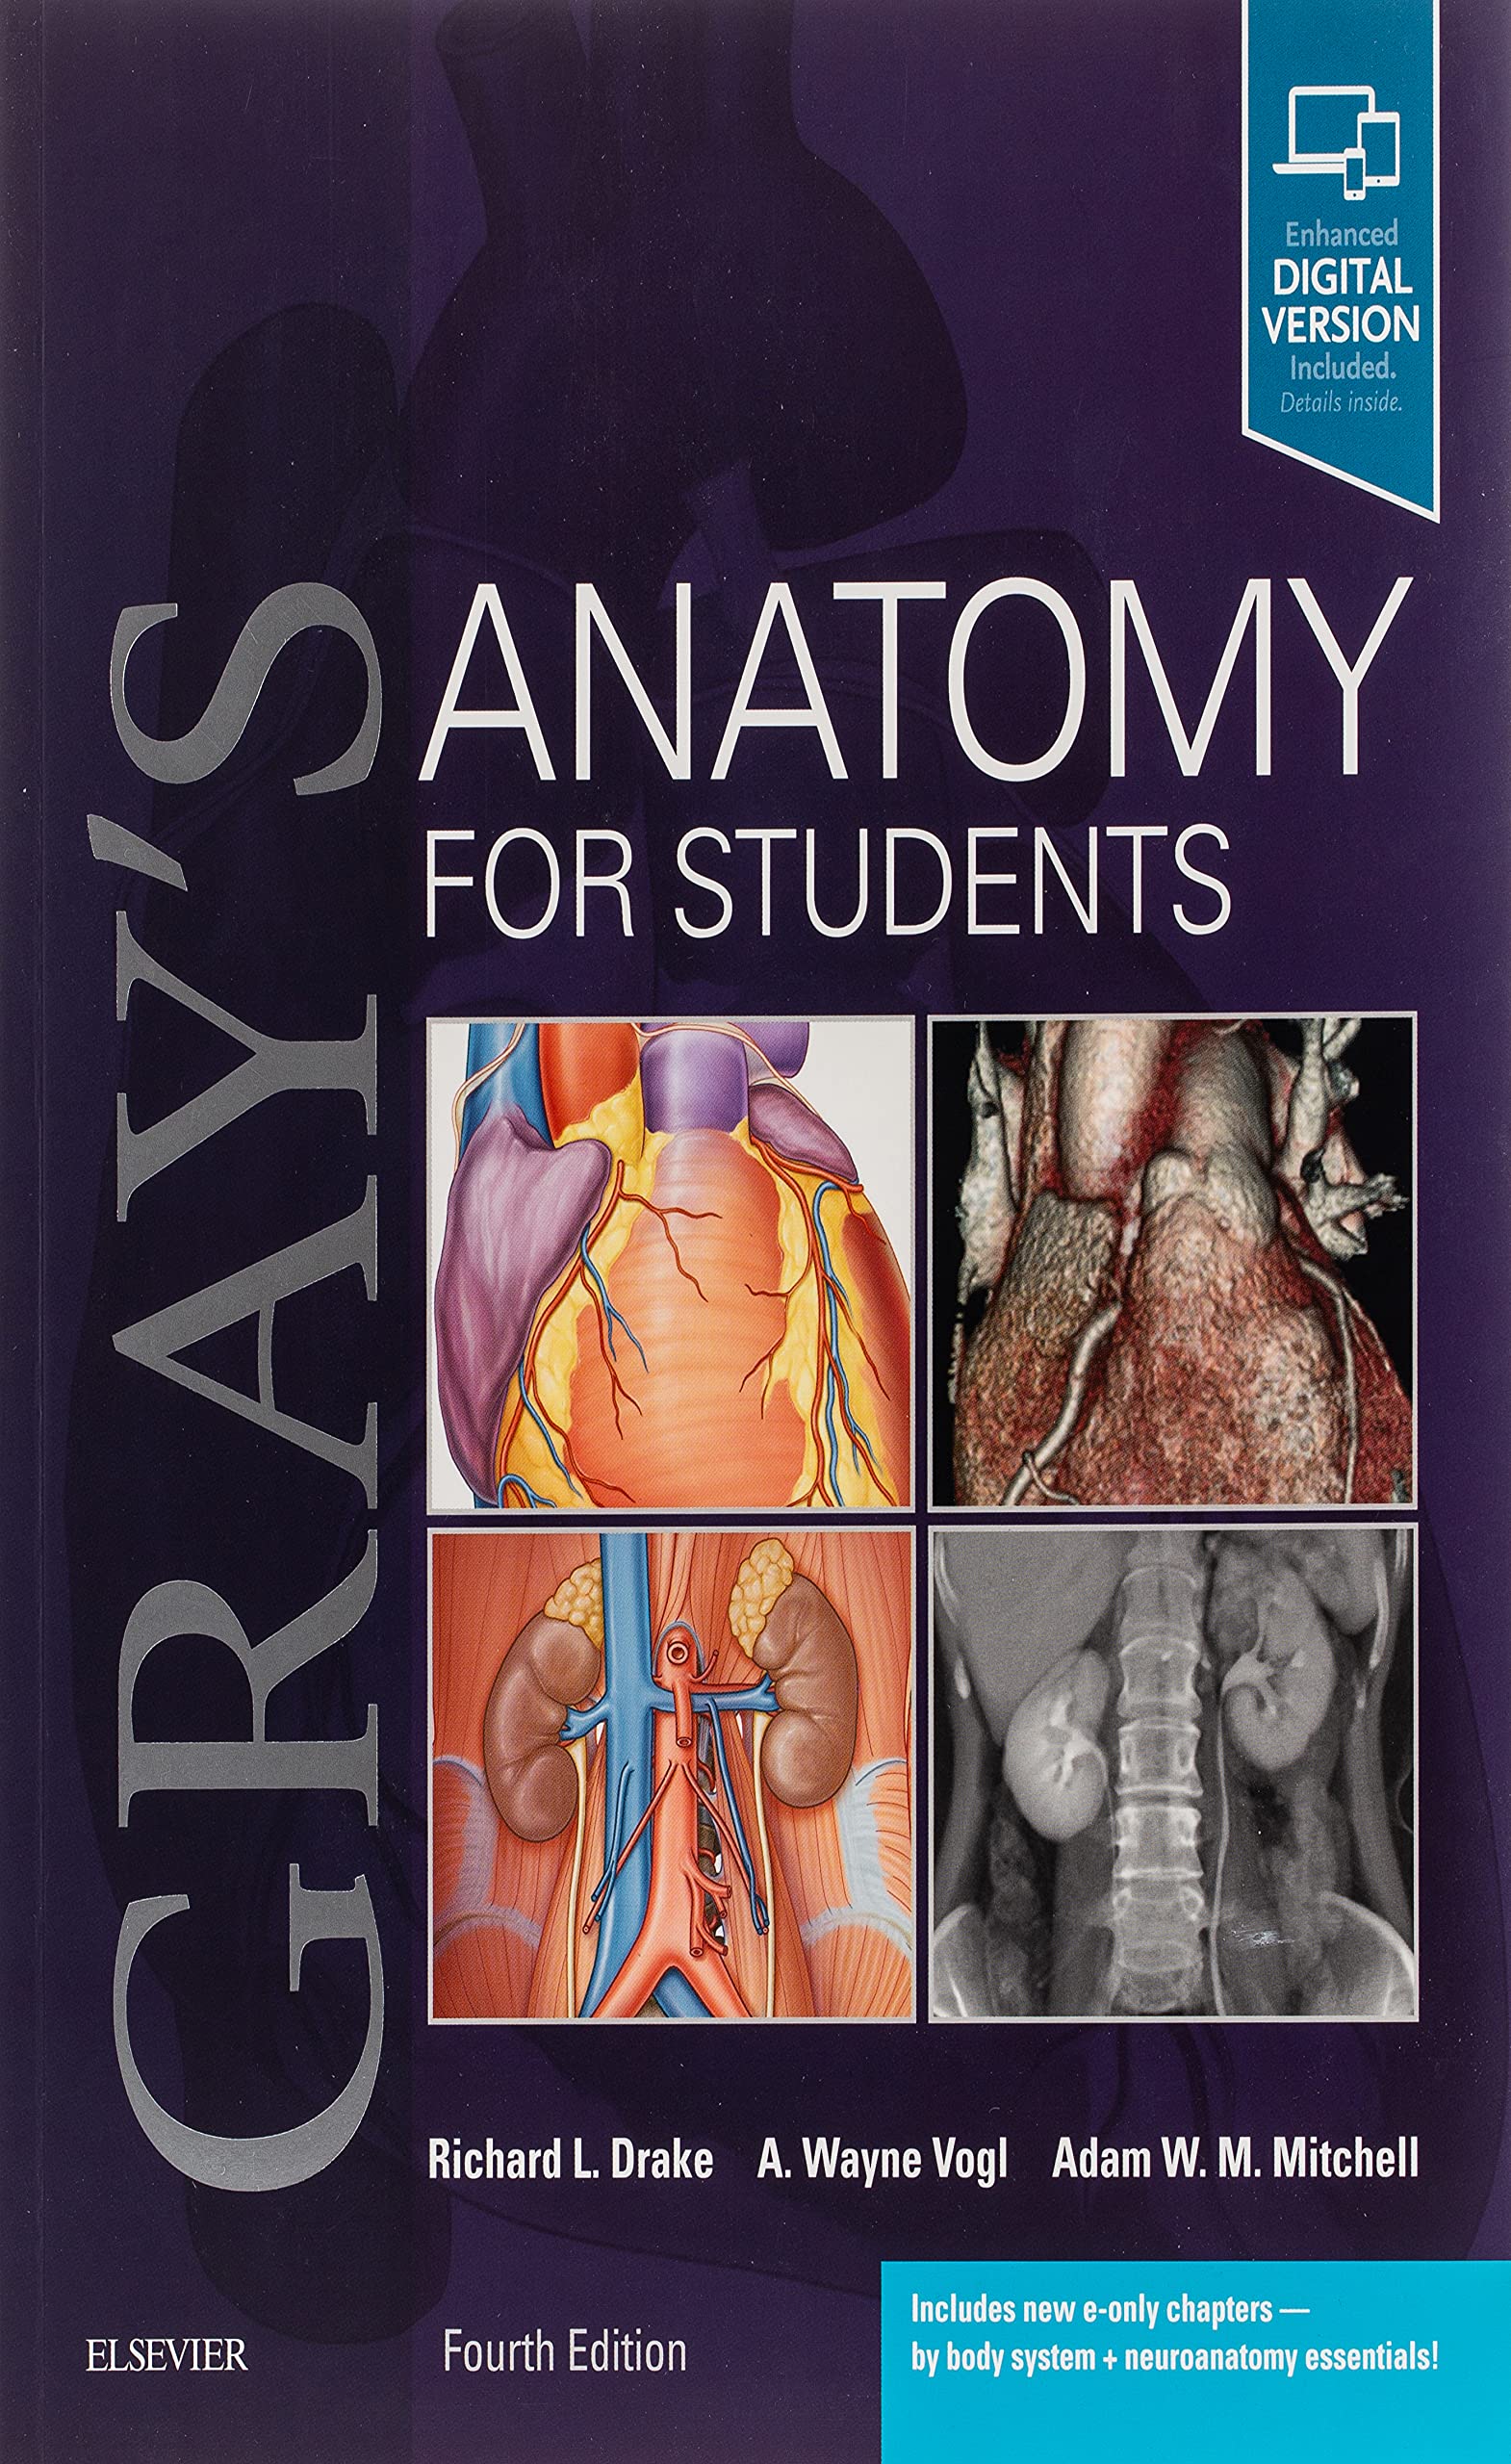 Grays Anatomy for Students 4th Edition 2019